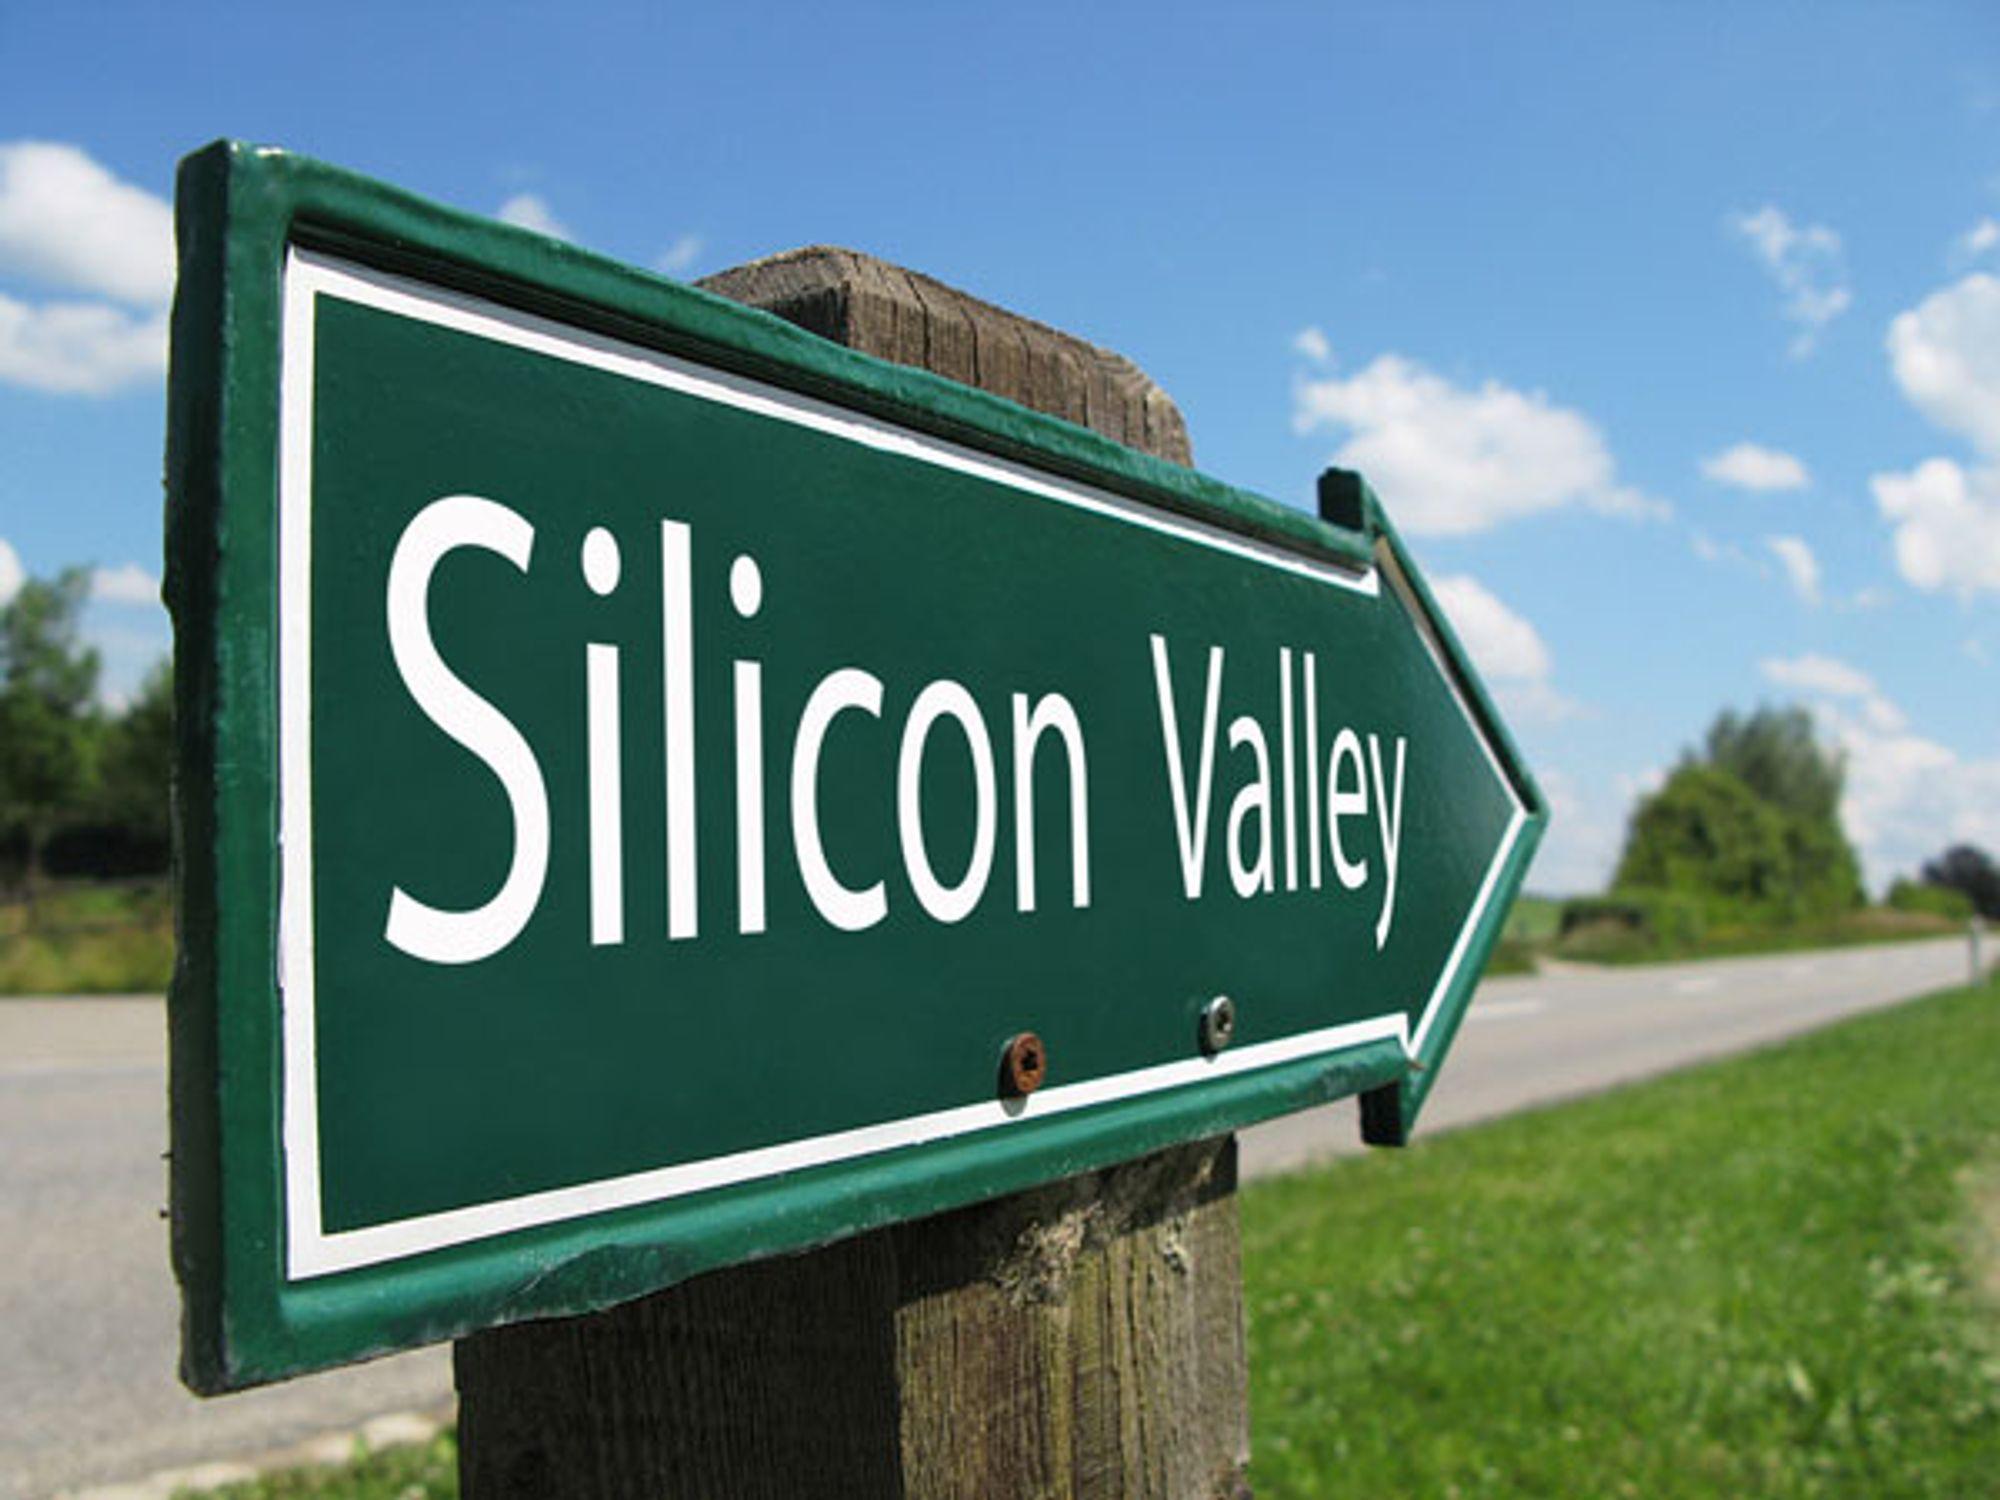 I’m gonna go to Silicon Valley (1)